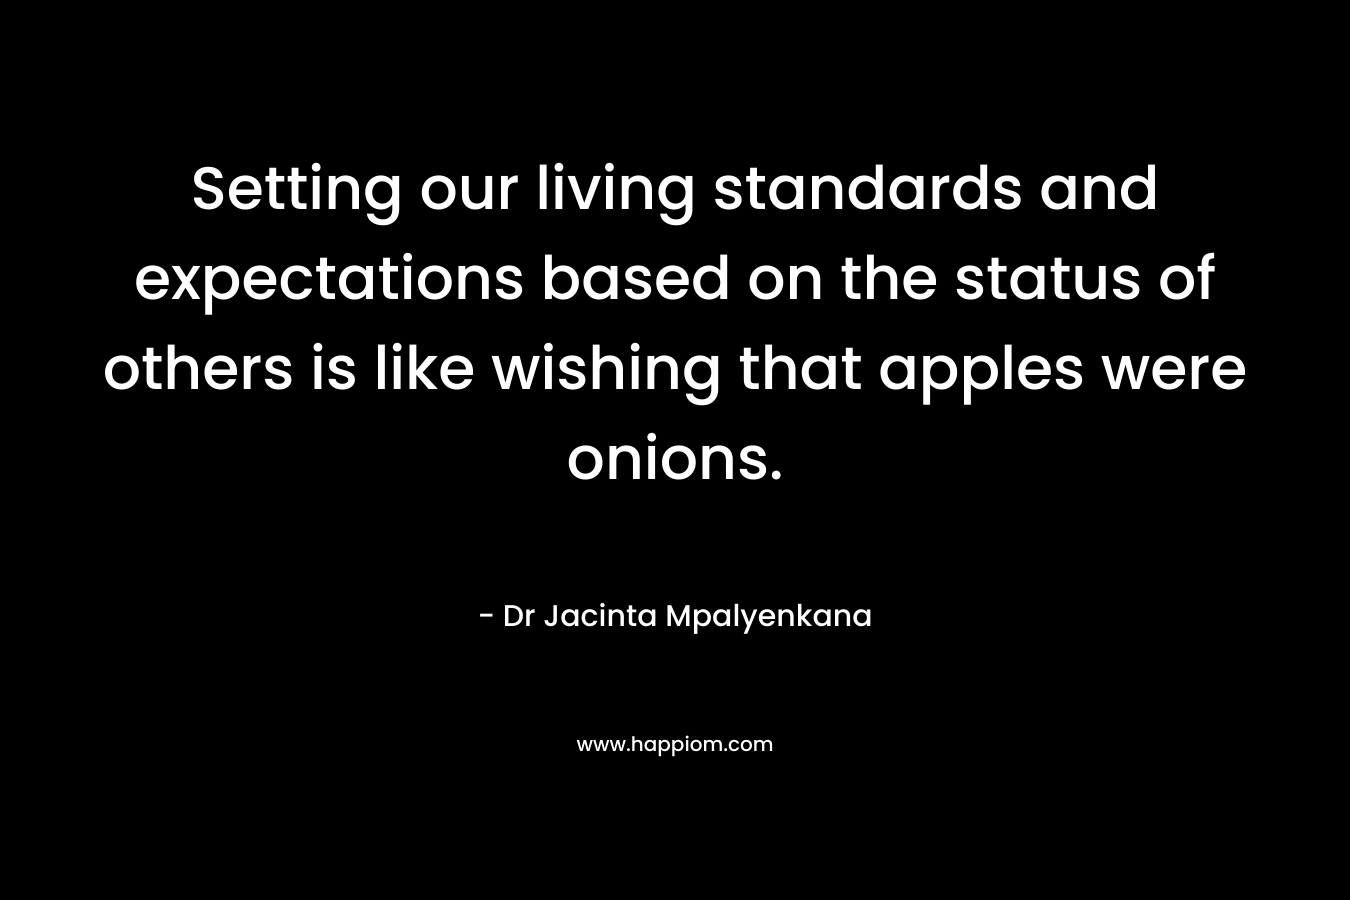 Setting our living standards and expectations based on the status of others is like wishing that apples were onions.